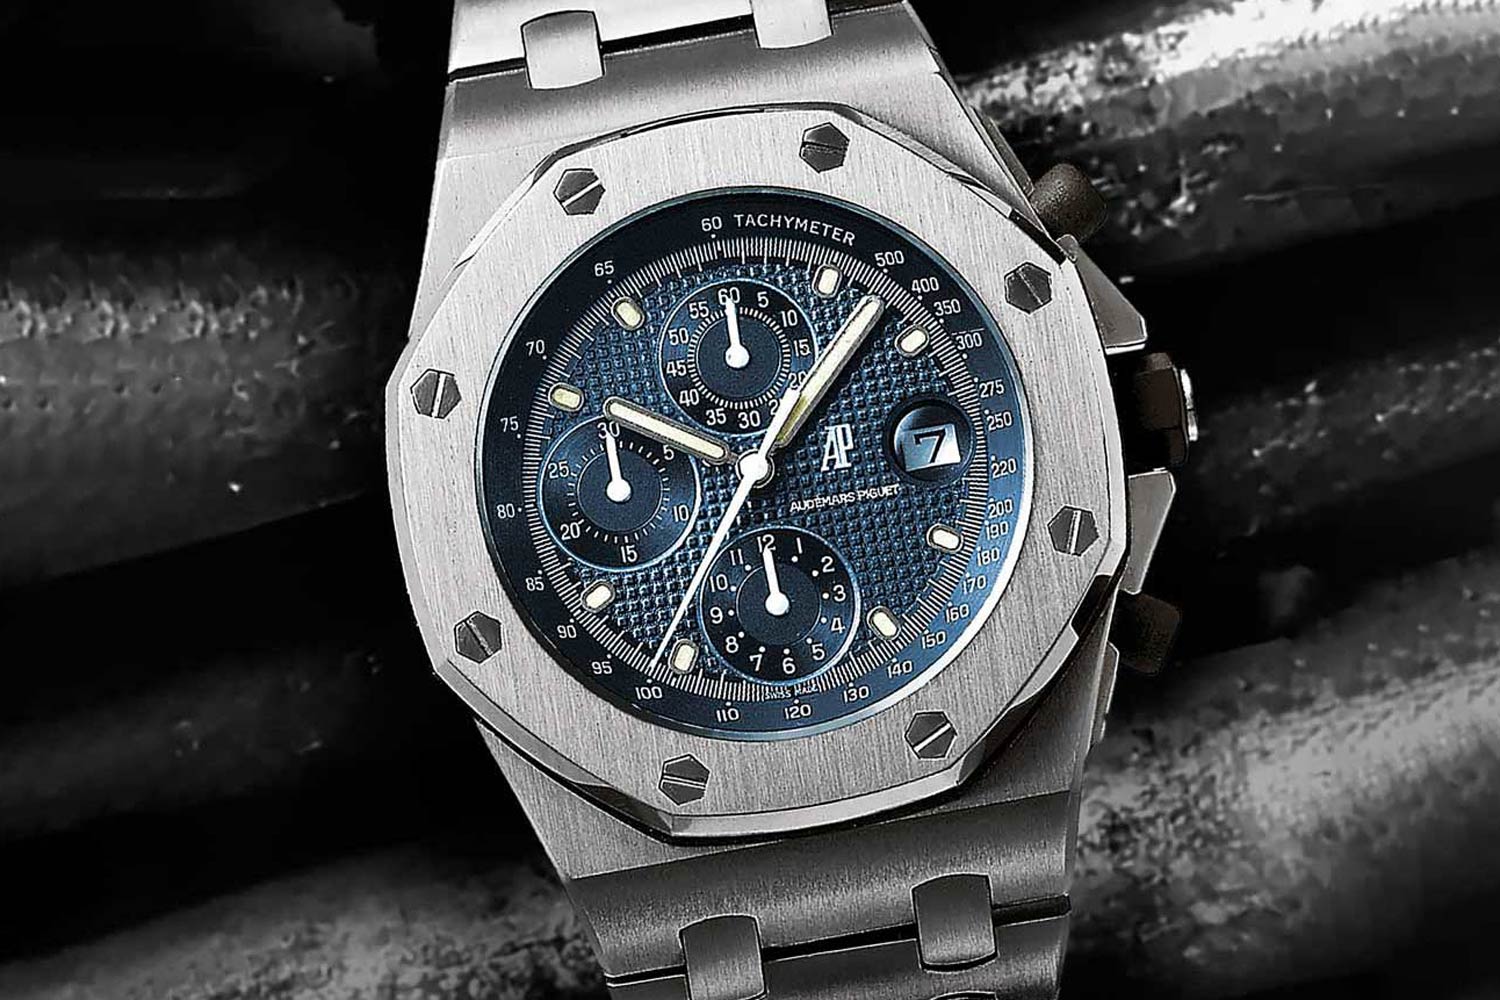 The Royal Oak Offshore broke through the size barrier with its 42mm case in 1993, establishing an unheard-of precedent for large-sized watches. Coming with the blue dial to echo the original Royal Oak, it was the first of the Offshore line.